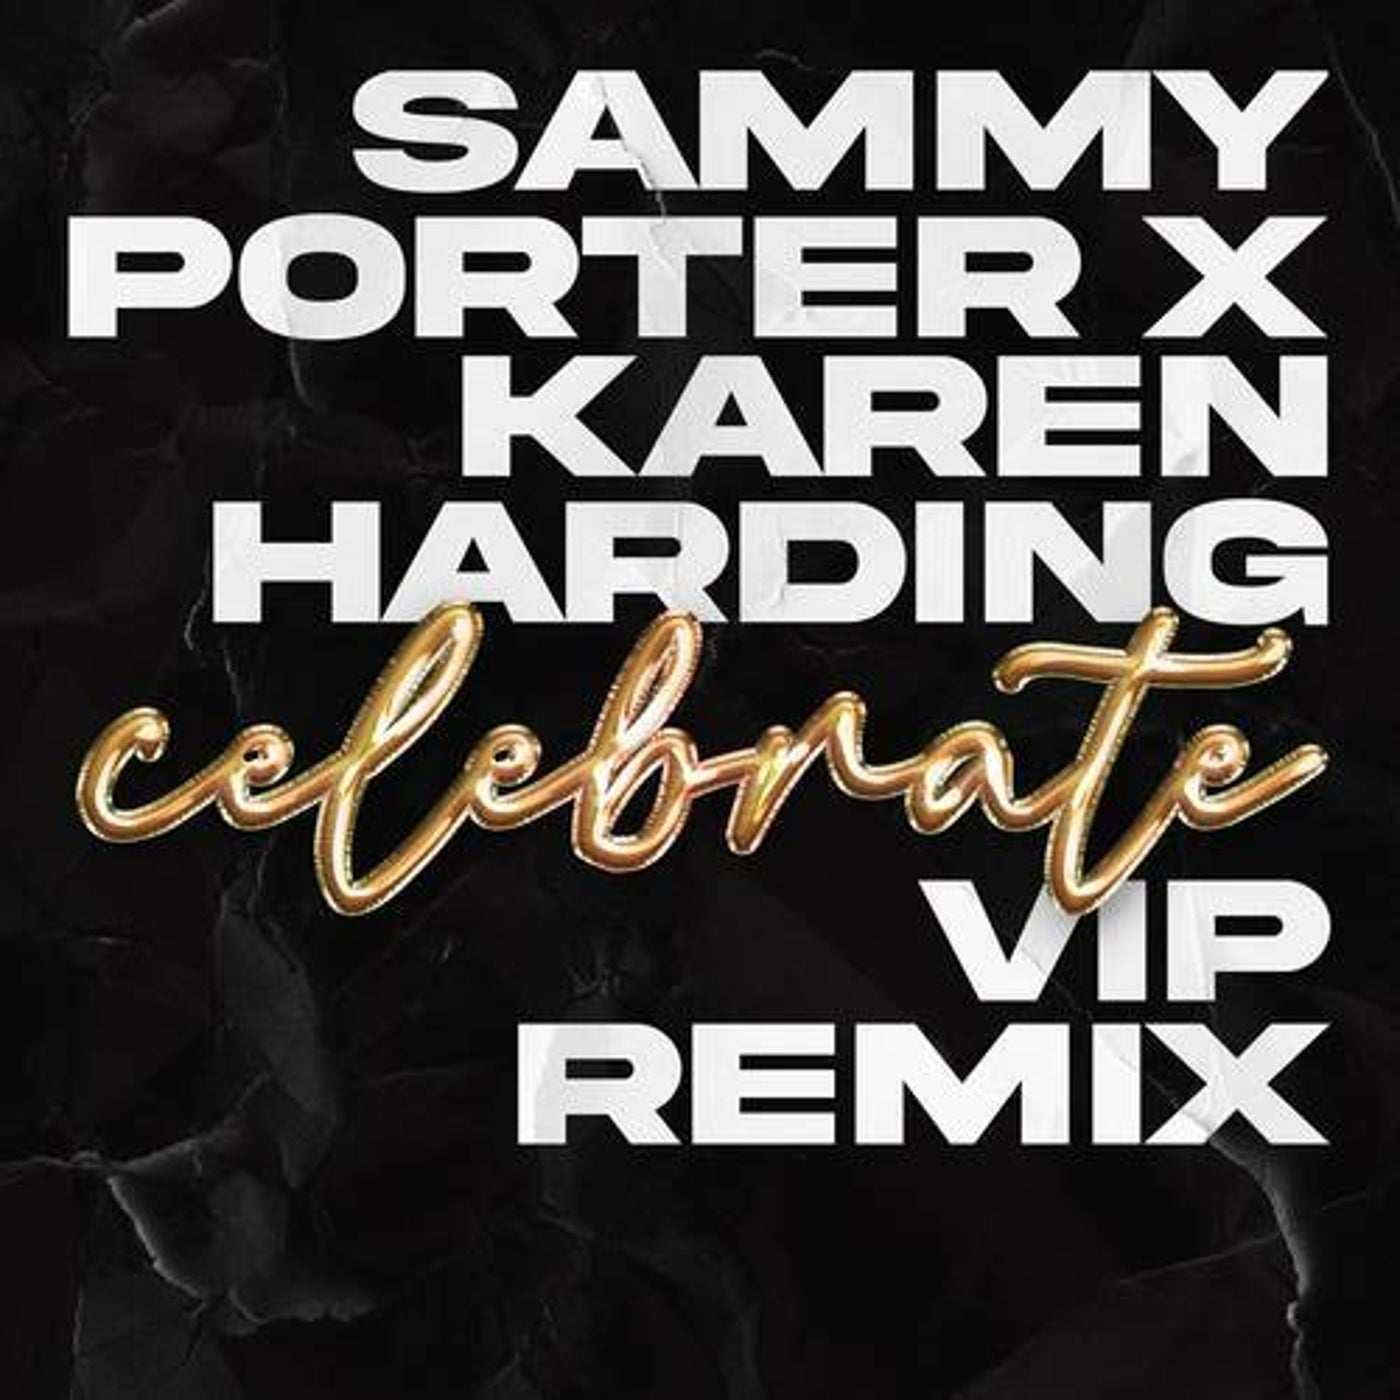 Celebrate (VIP Mix - Extended)